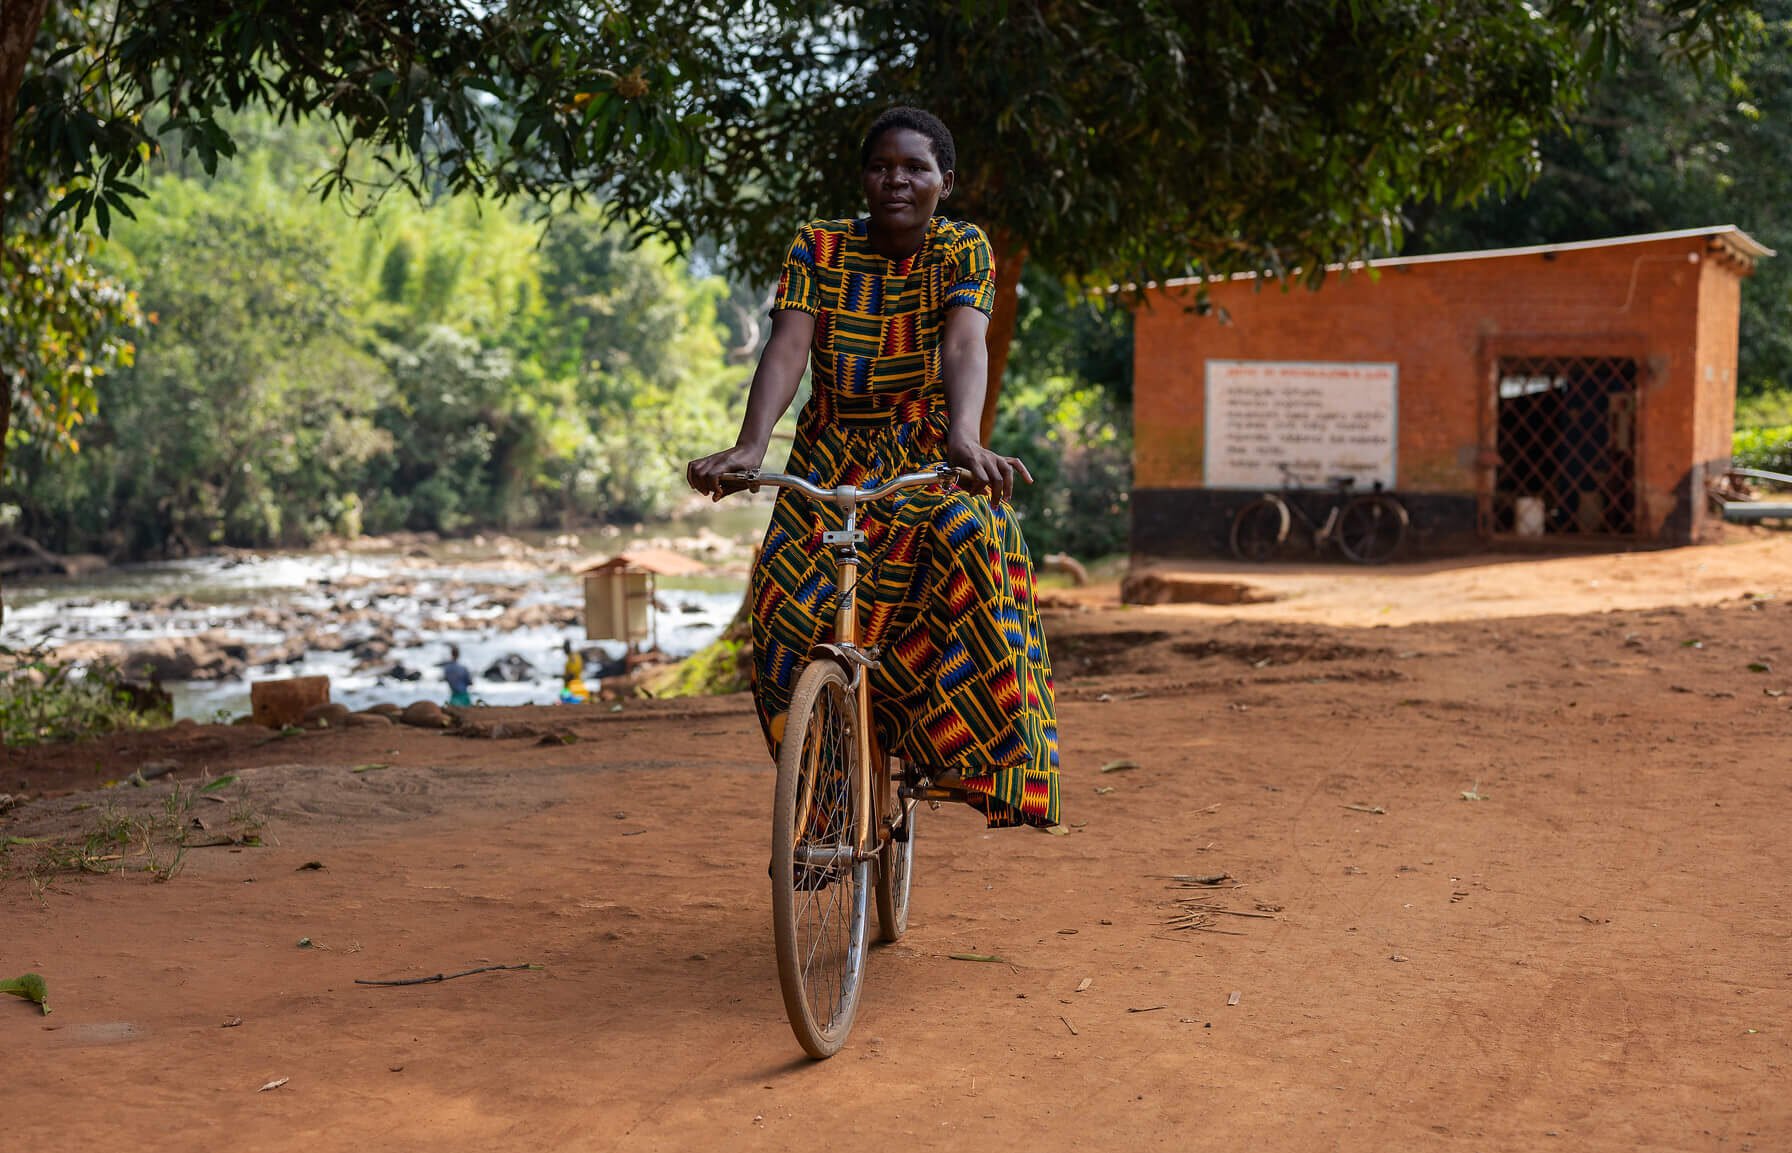 Eliza Bangula riding her bicycle which she bought after saving money for six months with the Amayi Otsogola VSLA. Taking part in the Ulalo programme and saving money gave Eliza an alternative to borrowing money from loan sharks at high rates of interest. Mulanje District, Malawi. Image: ETP/Homeline Media